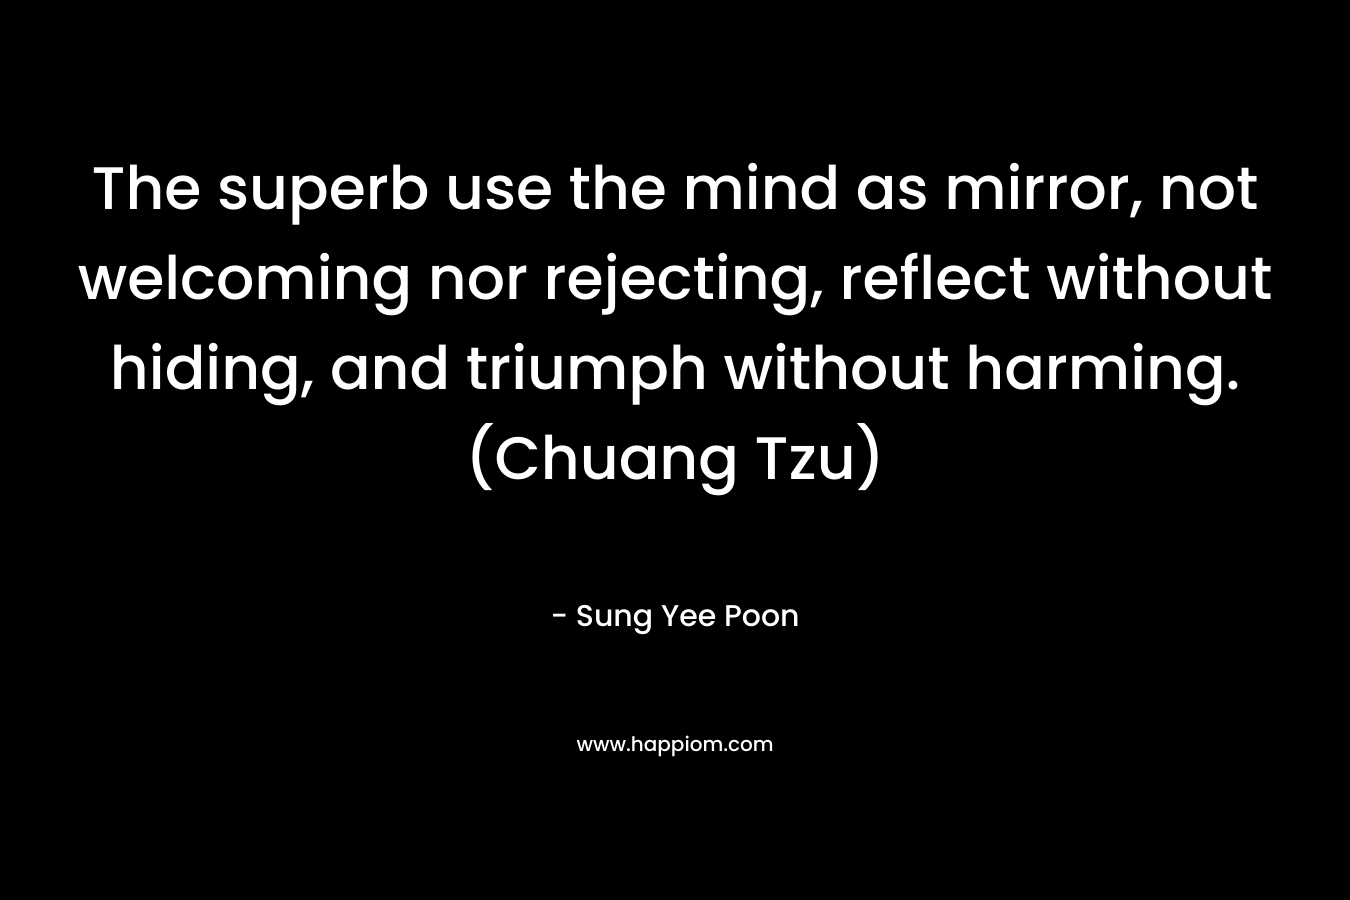 The superb use the mind as mirror, not welcoming nor rejecting, reflect without hiding, and triumph without harming. (Chuang Tzu) – Sung Yee Poon